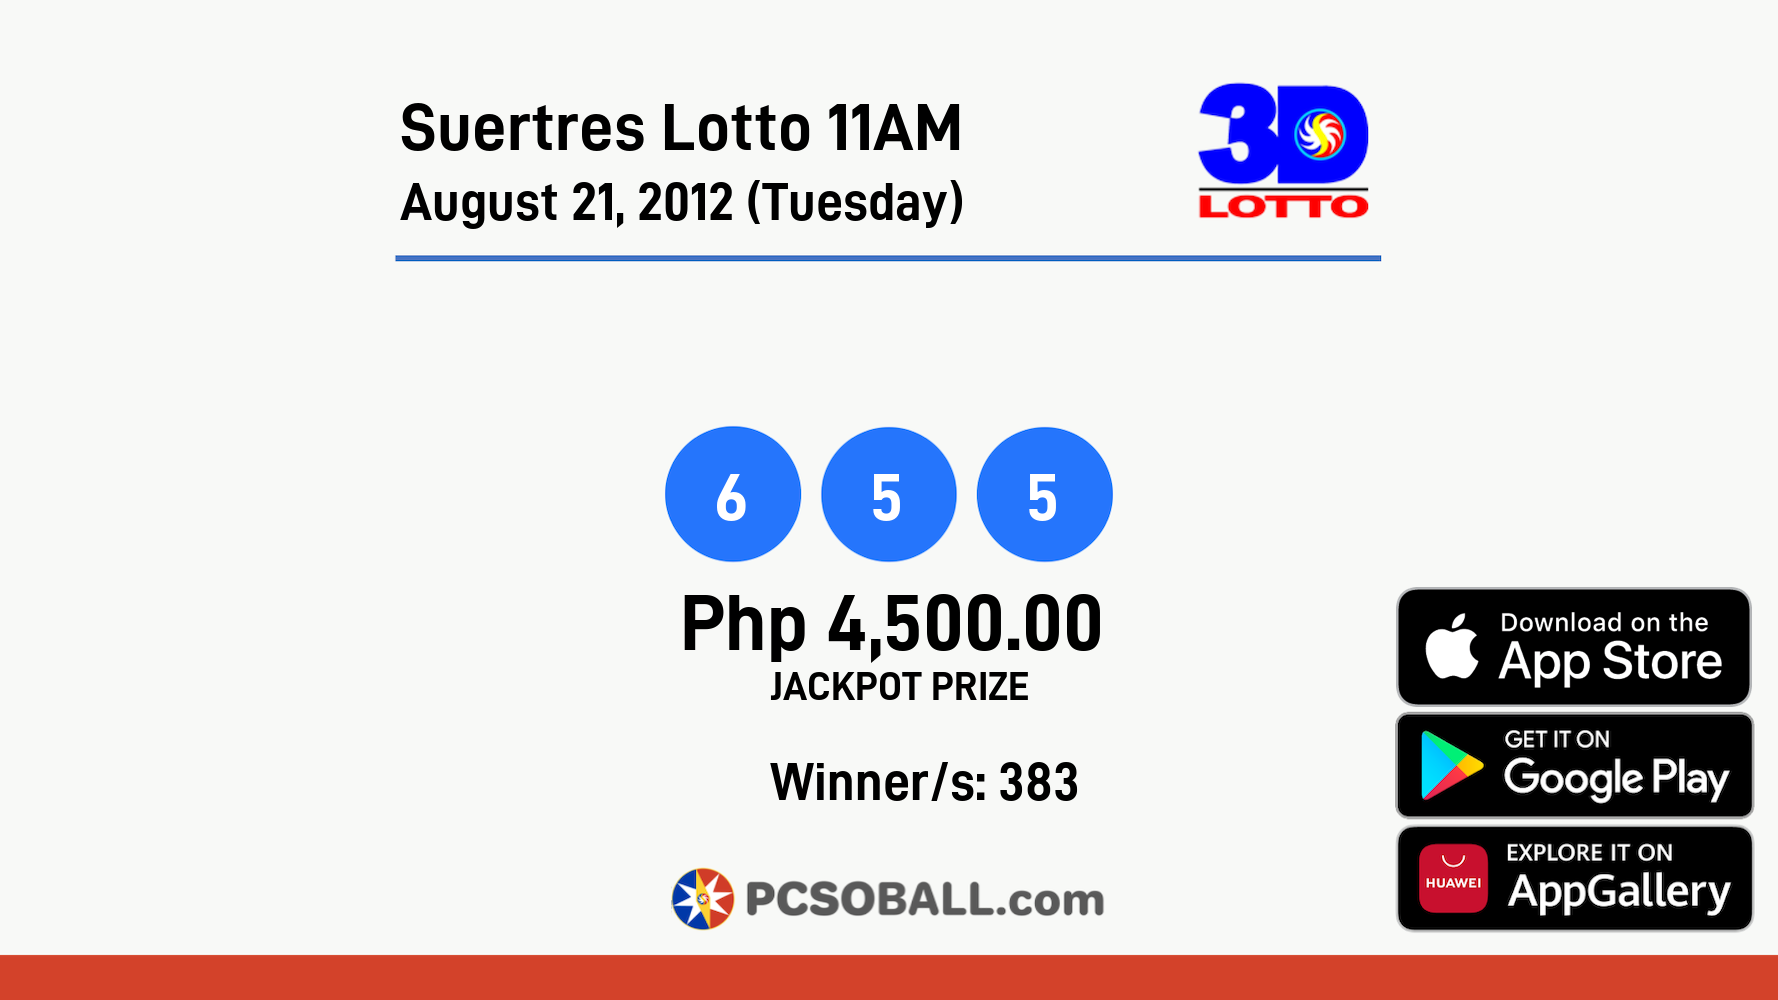 Suertres Lotto 11AM August 21, 2012 (Tuesday) Result